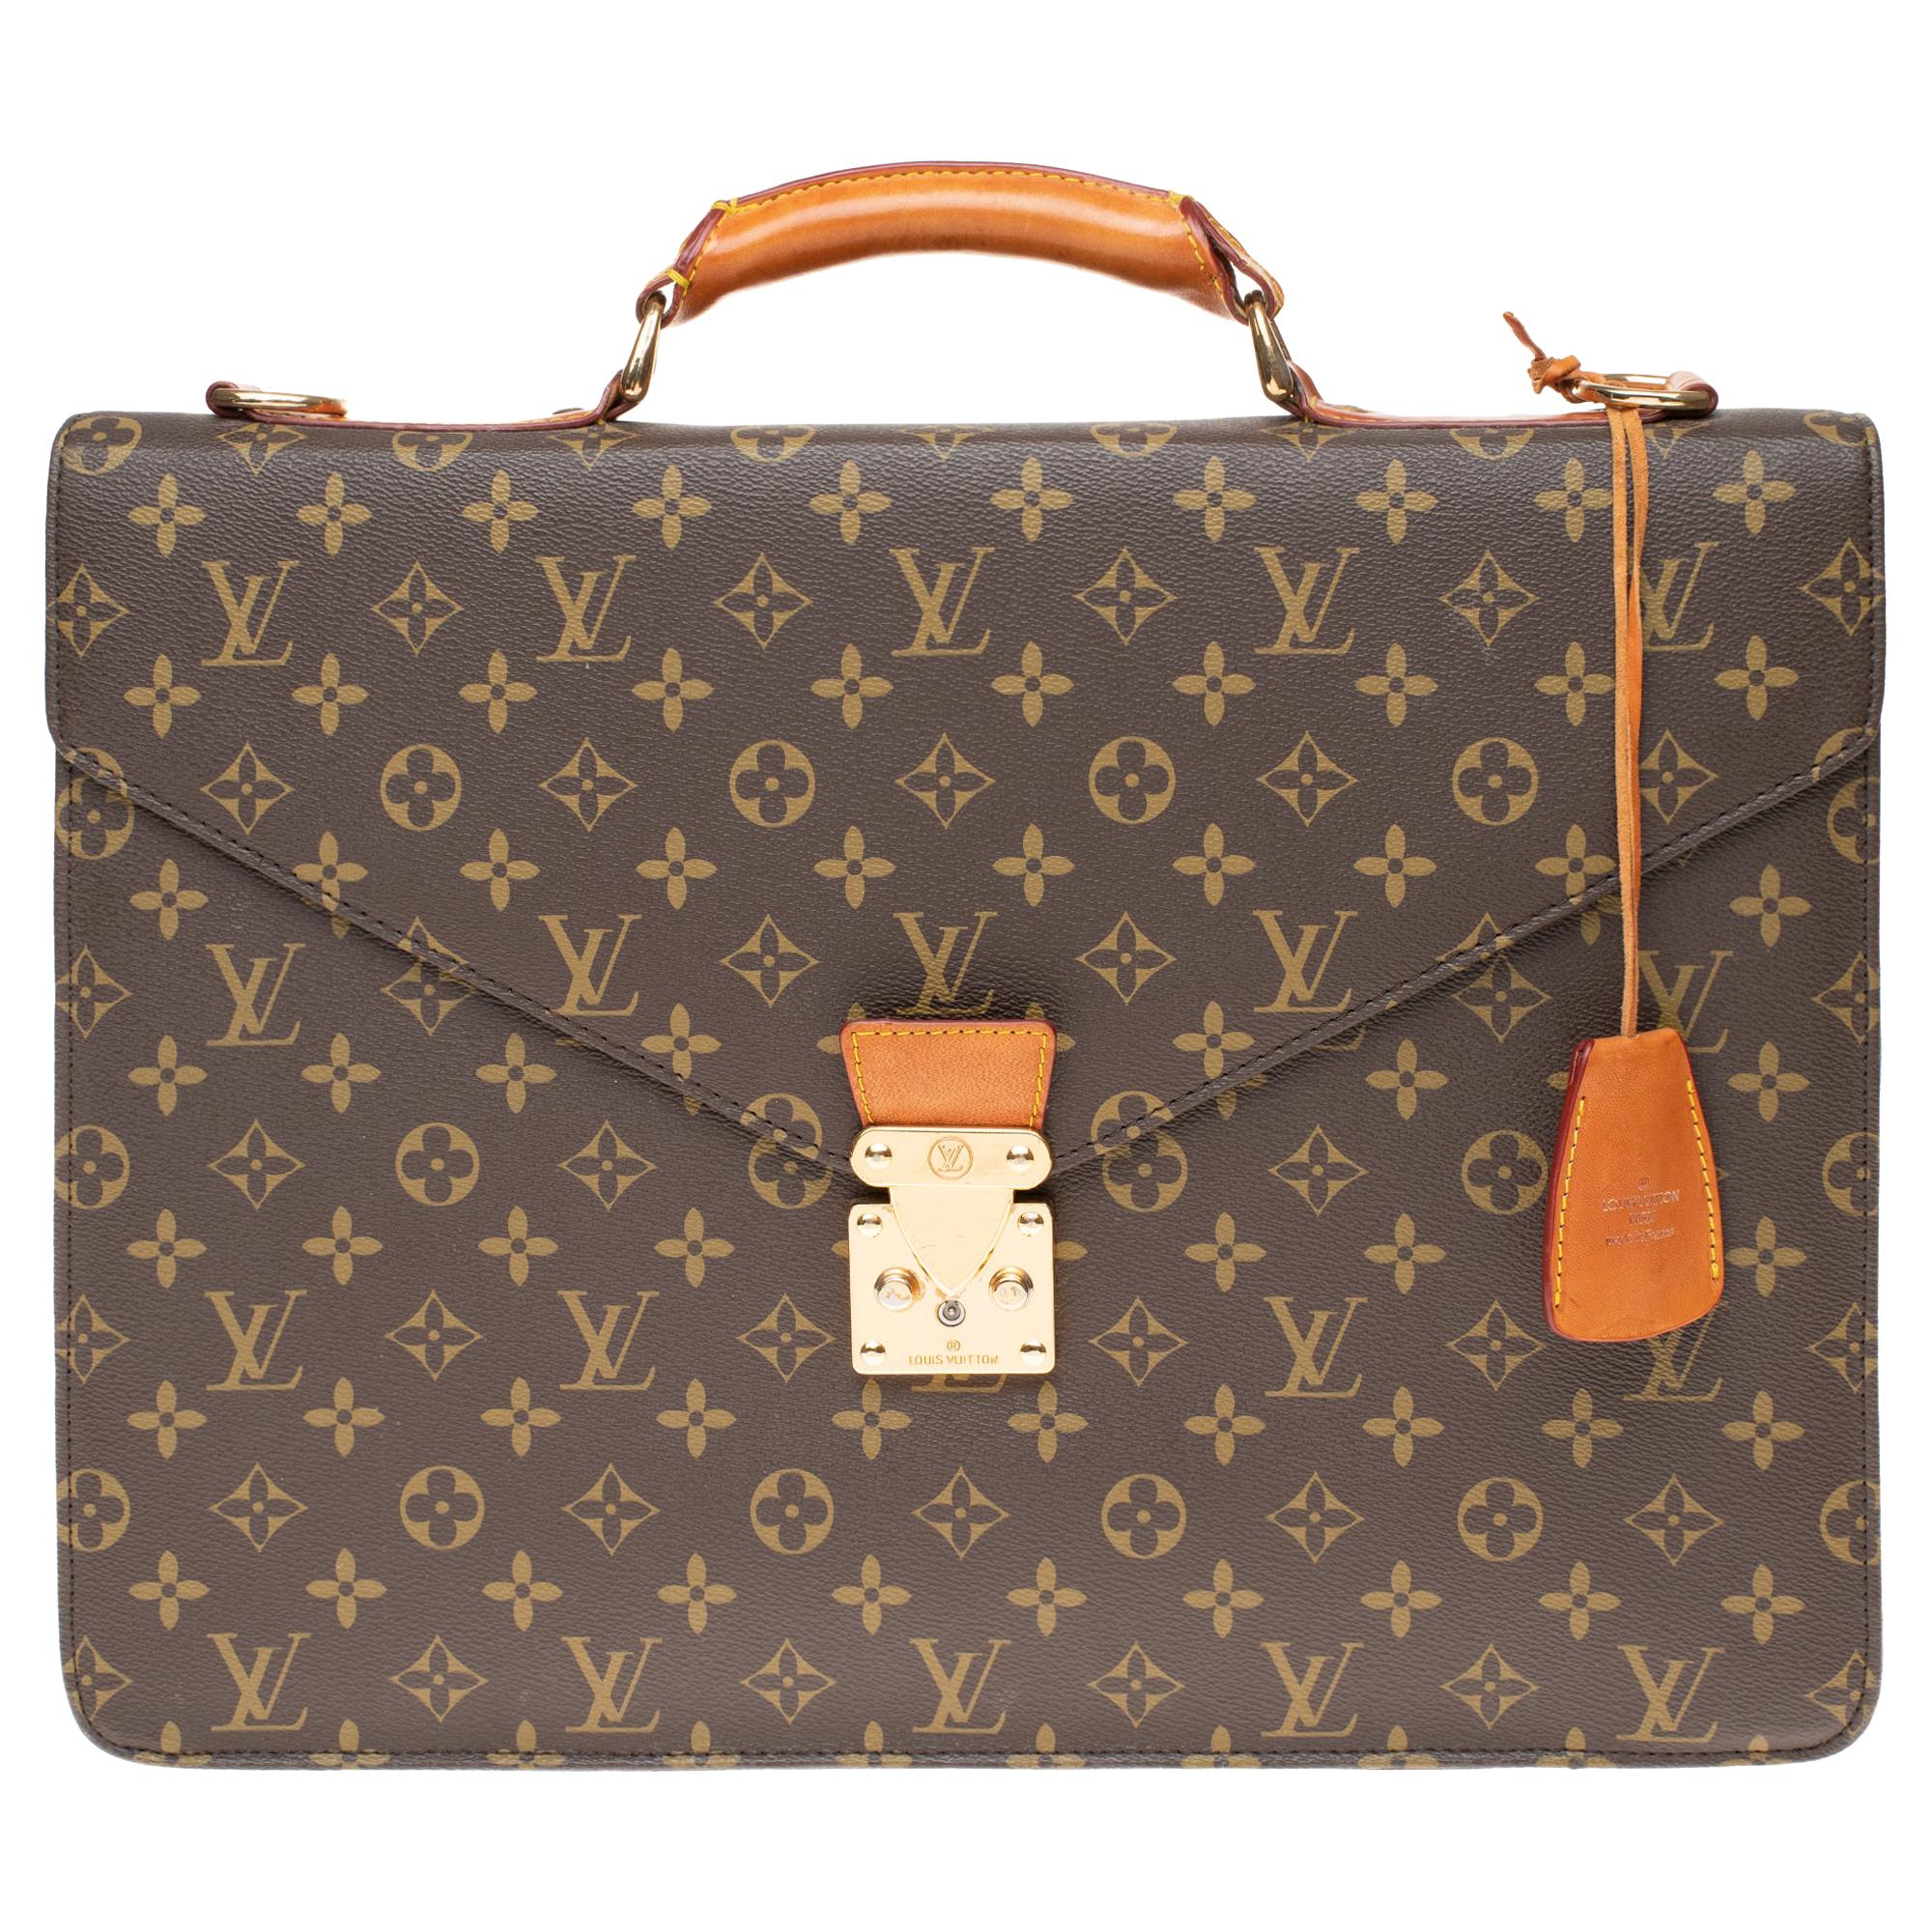 Louis Vuitton "Ambassador" Satchel in Monogram canvas and natural leather